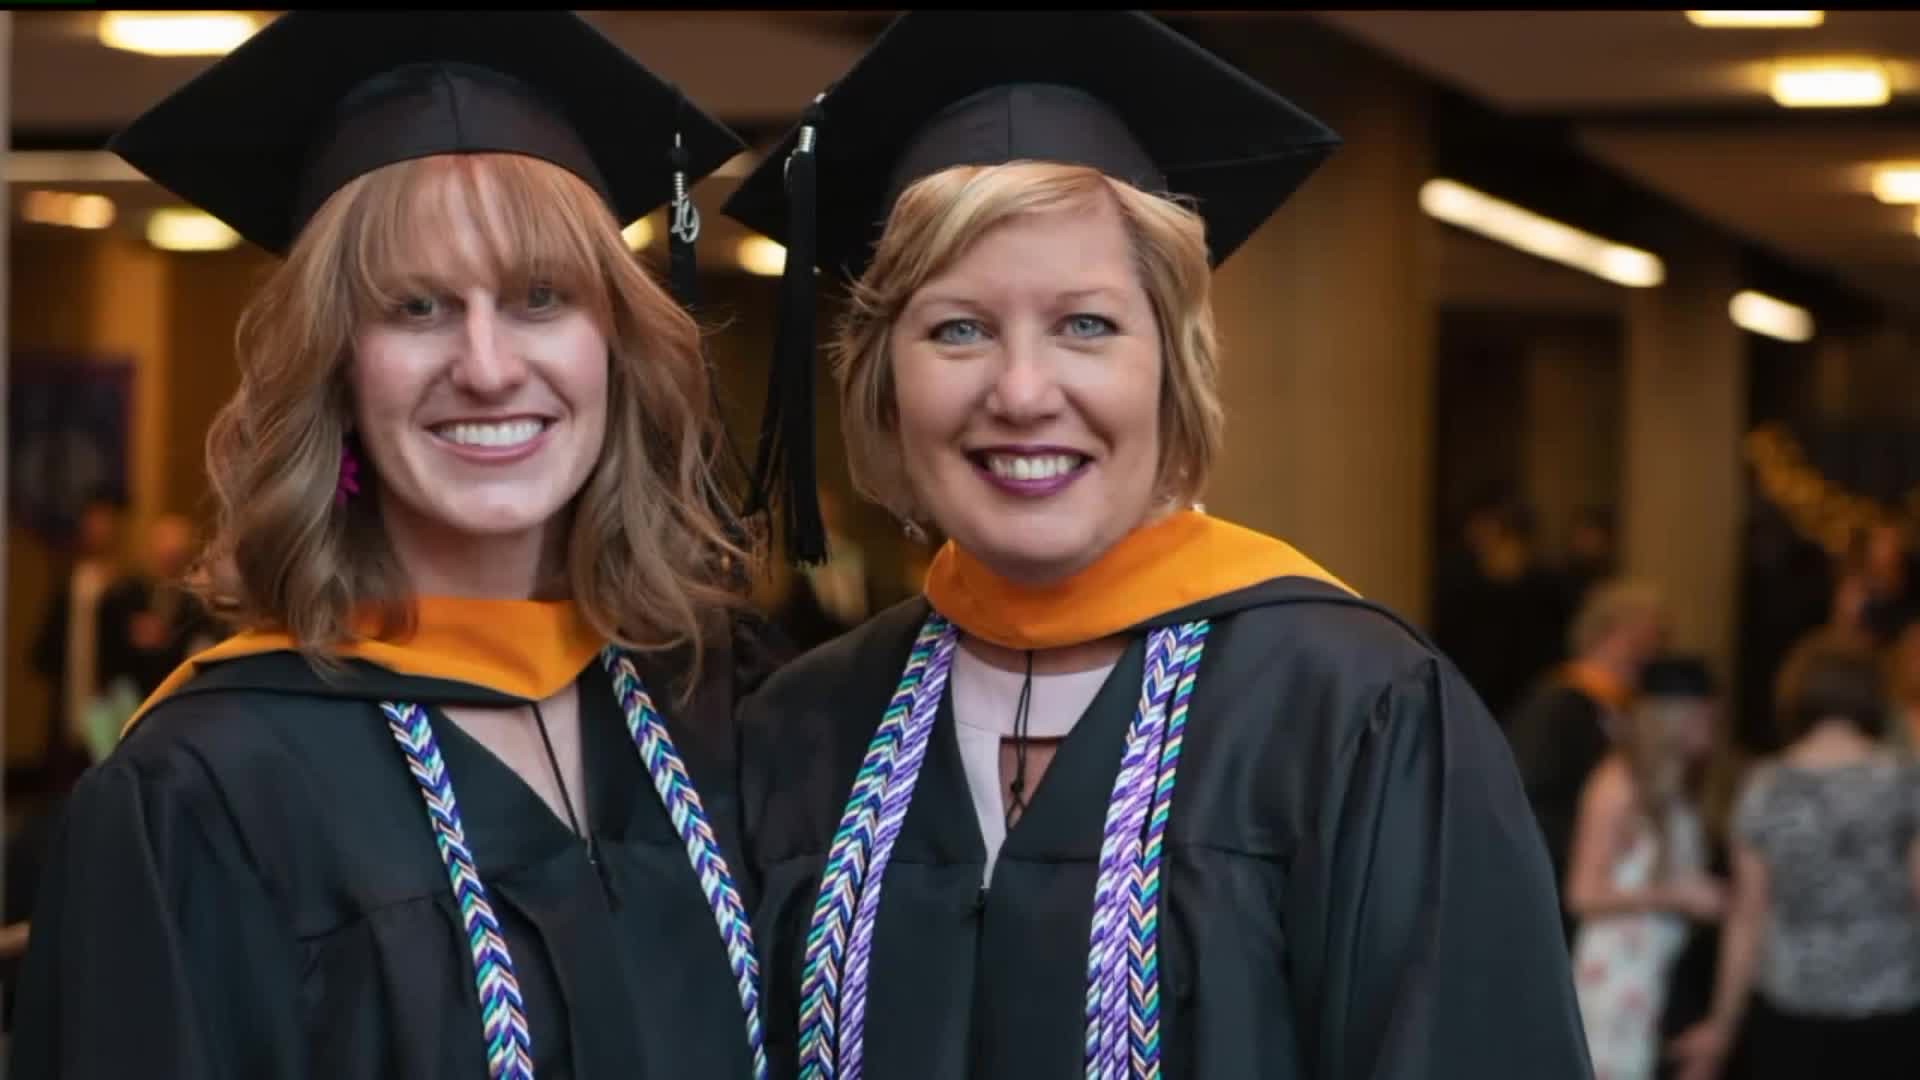 Friends set to take the stage at Pennsylvania College of Health Sciences` Commencement